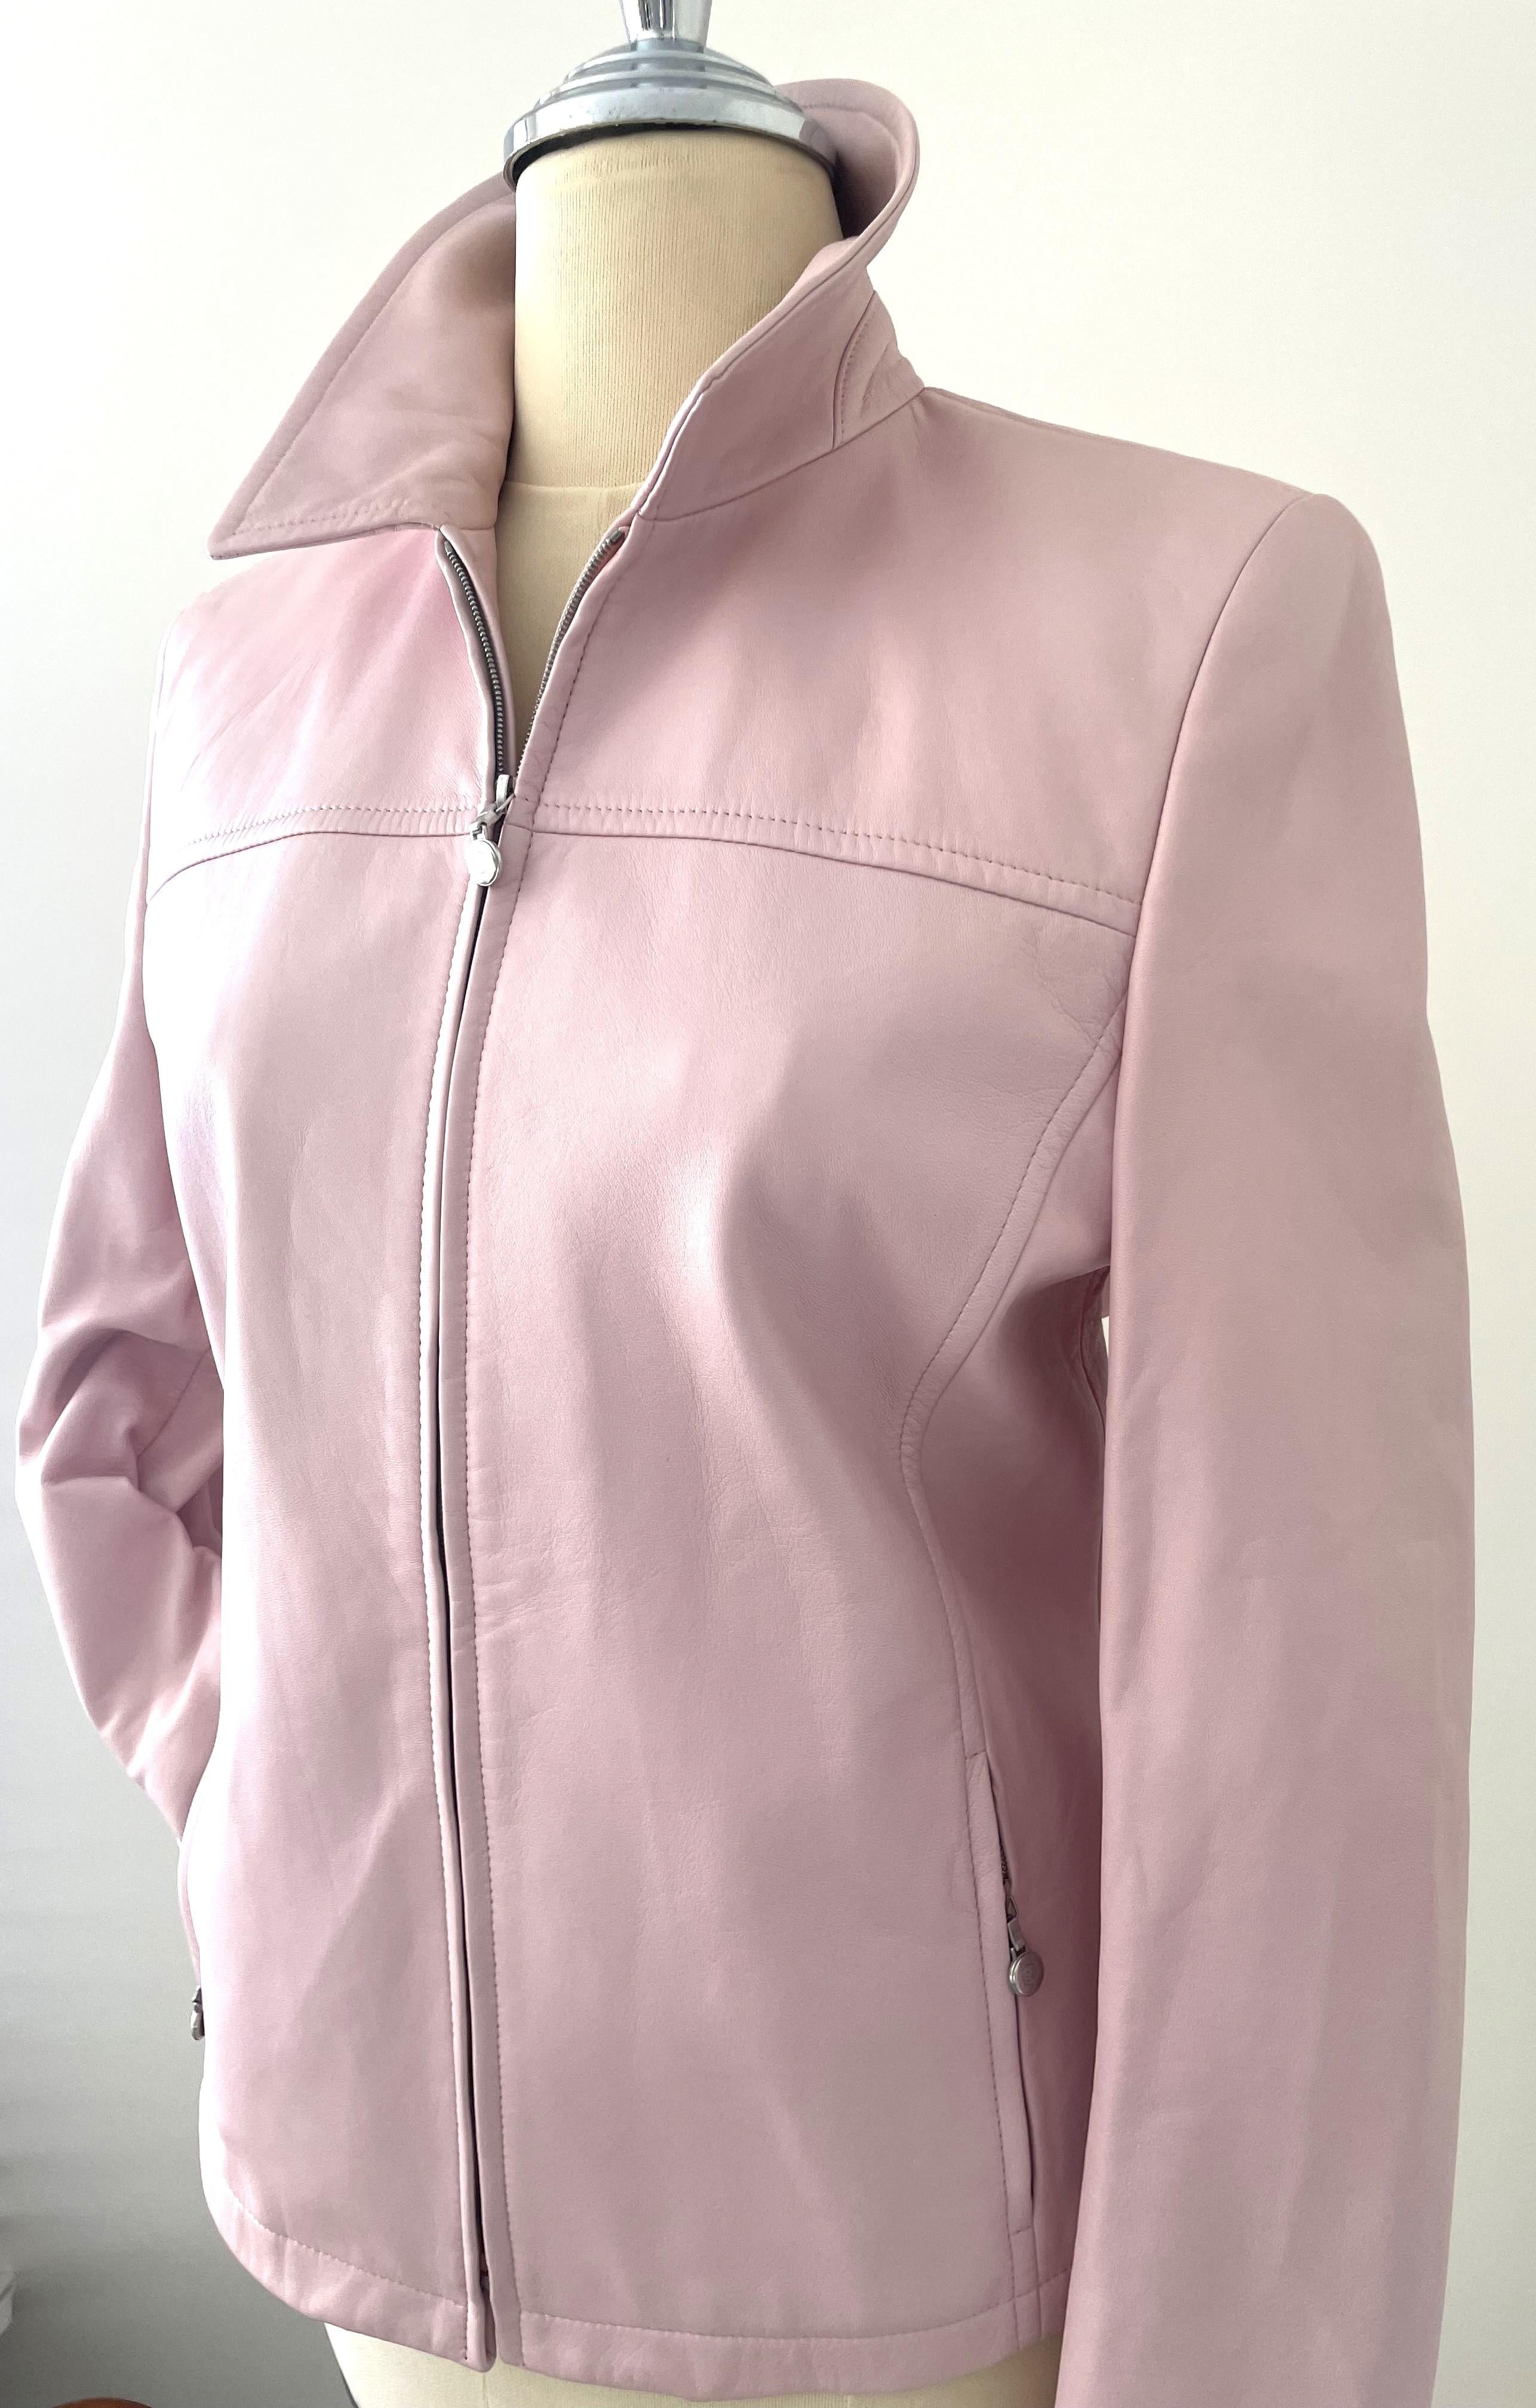 The Escada leather short jacket in light pink from the 90s is a fashionable vintage piece that reflects the style and trends of that era. Escada is a luxury fashion brand founded in 1978 by Margaretha and Wolfgang Ley, known for its high-quality